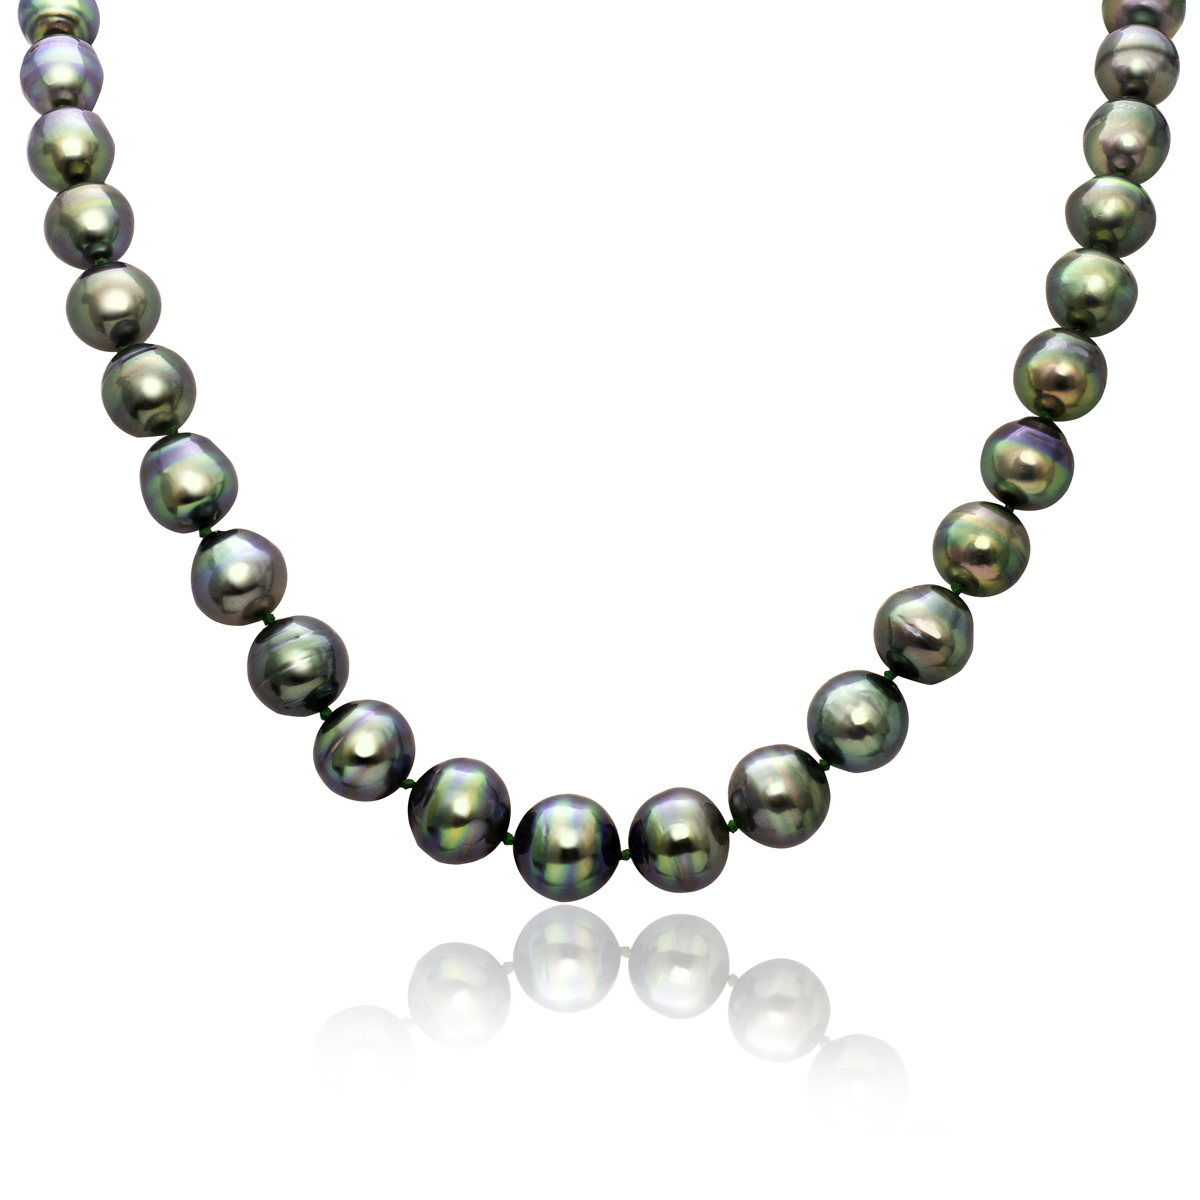 Peacock Green Tahitian Cultured Pearl Pendant Necklace 14K W Gold au585 Chain